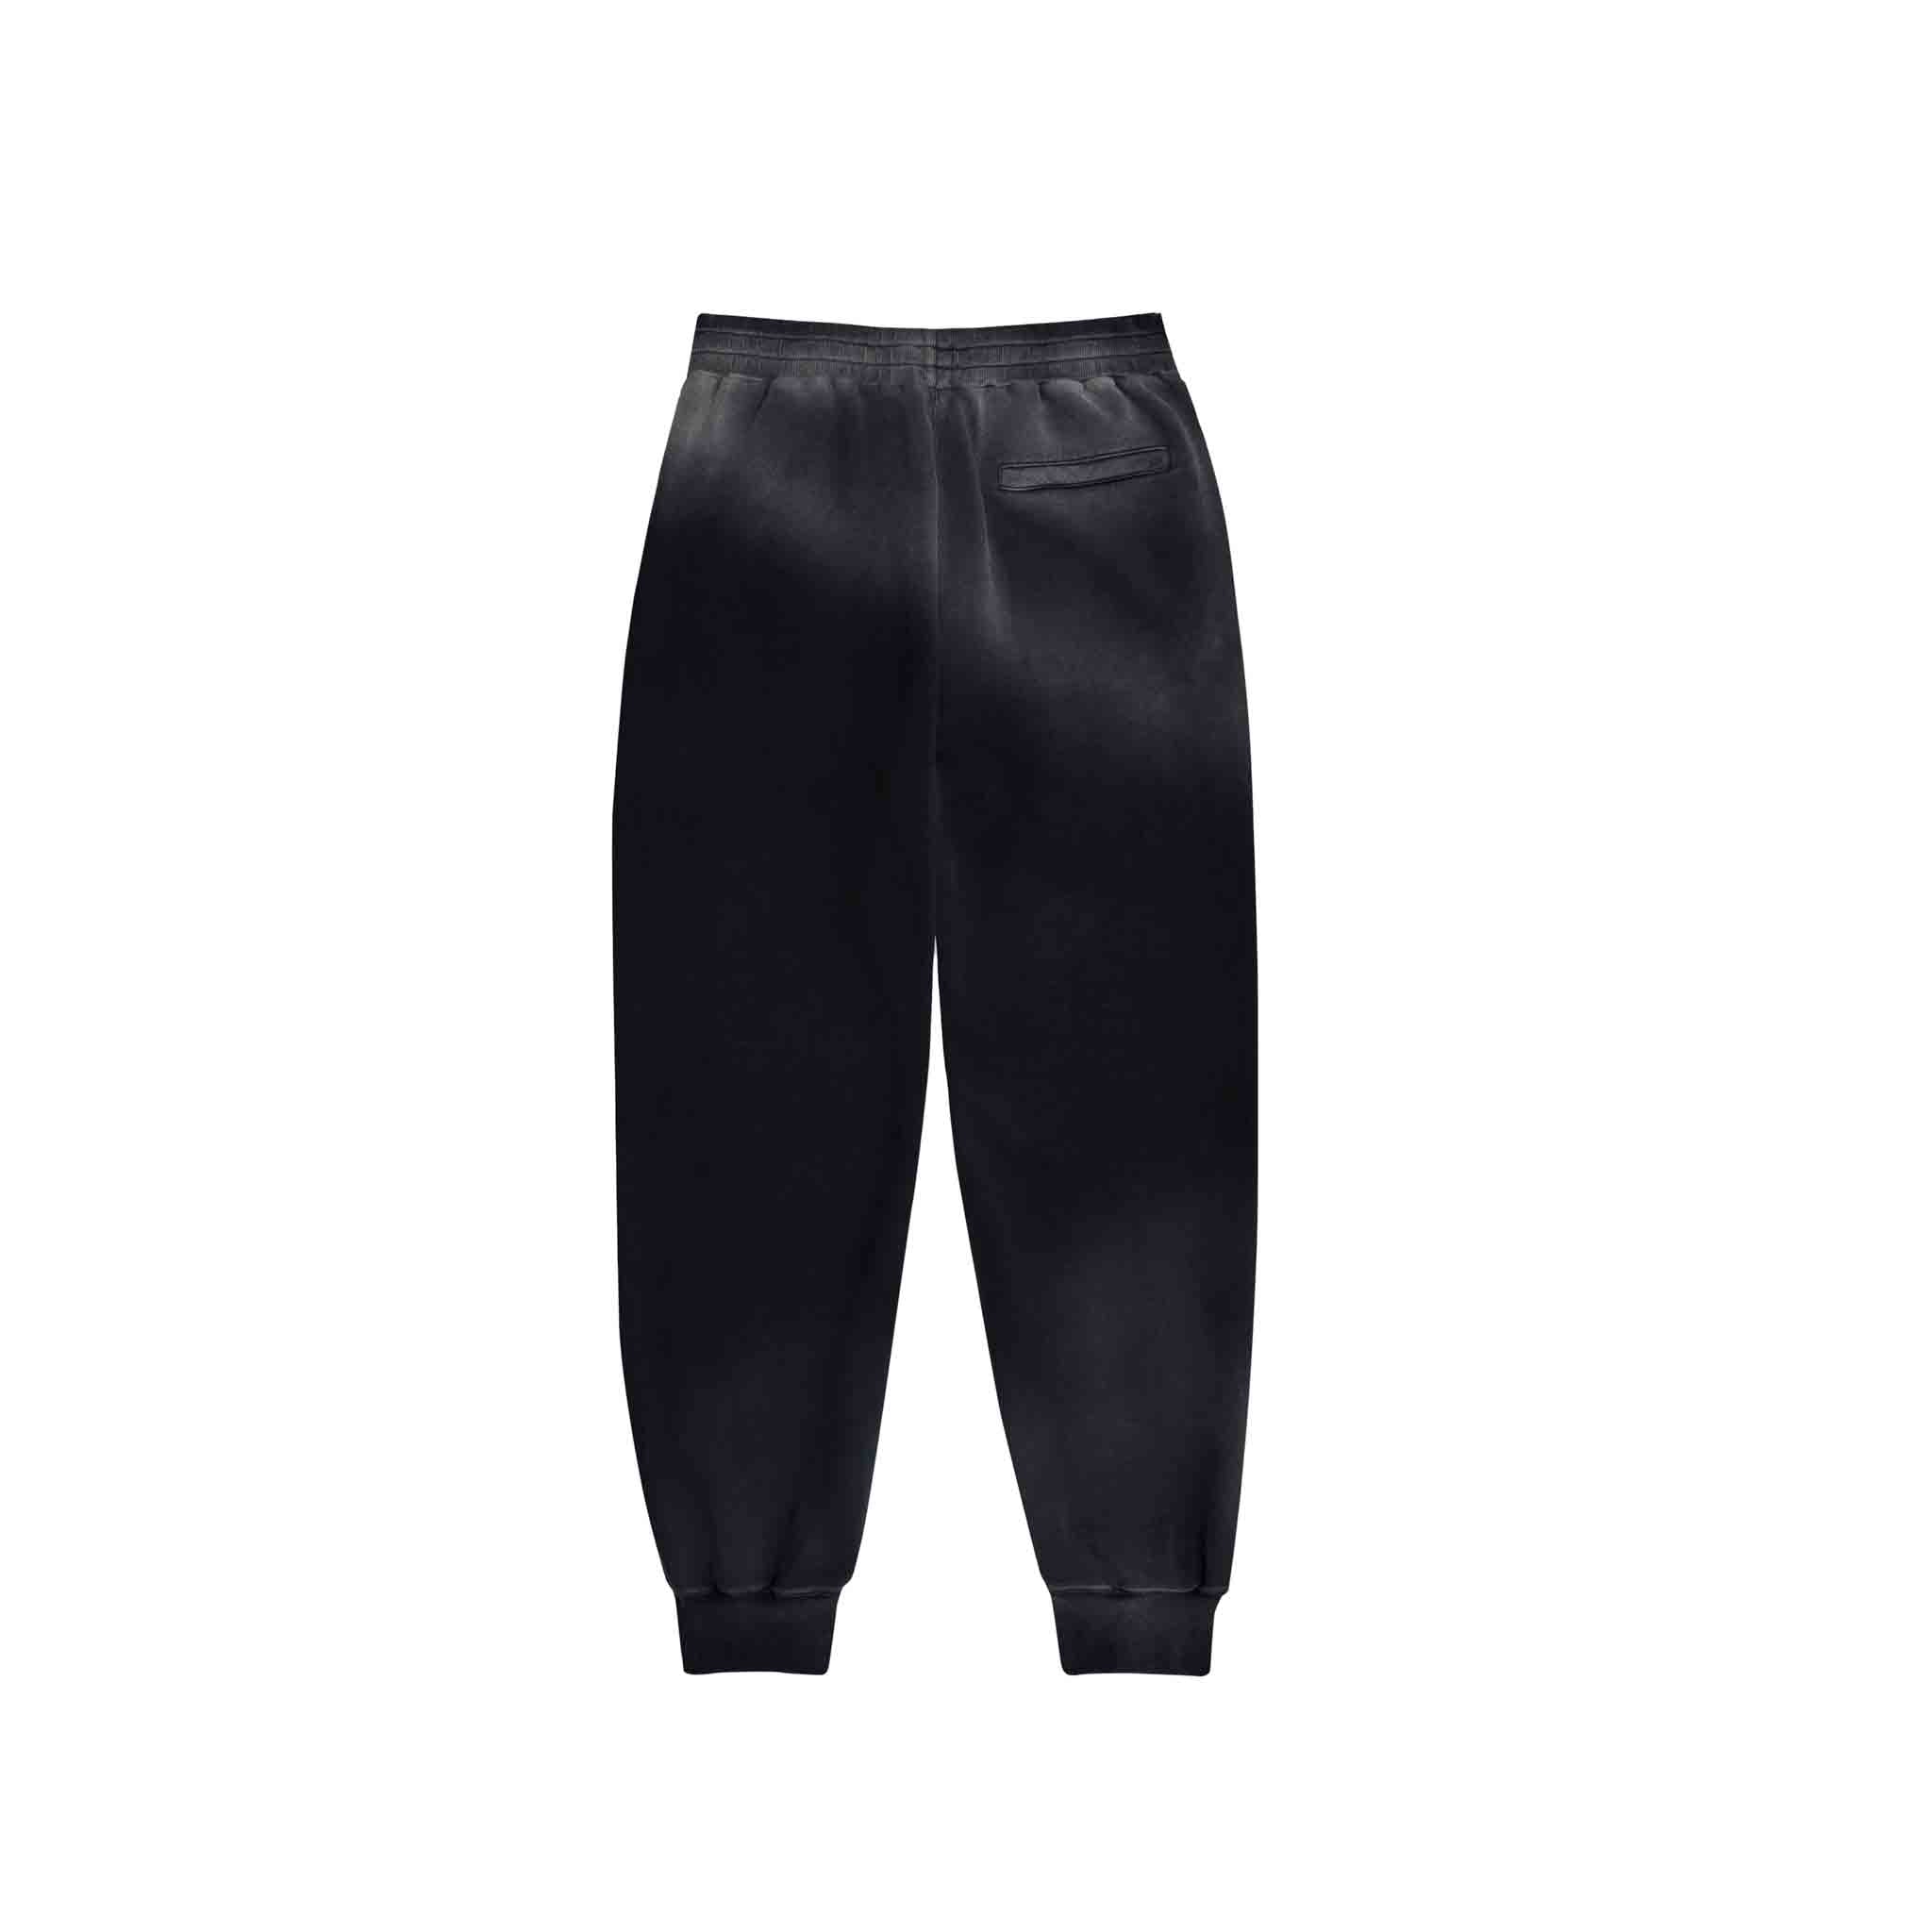 A-COLD-WALL* Vertex Jersey Pant in Black